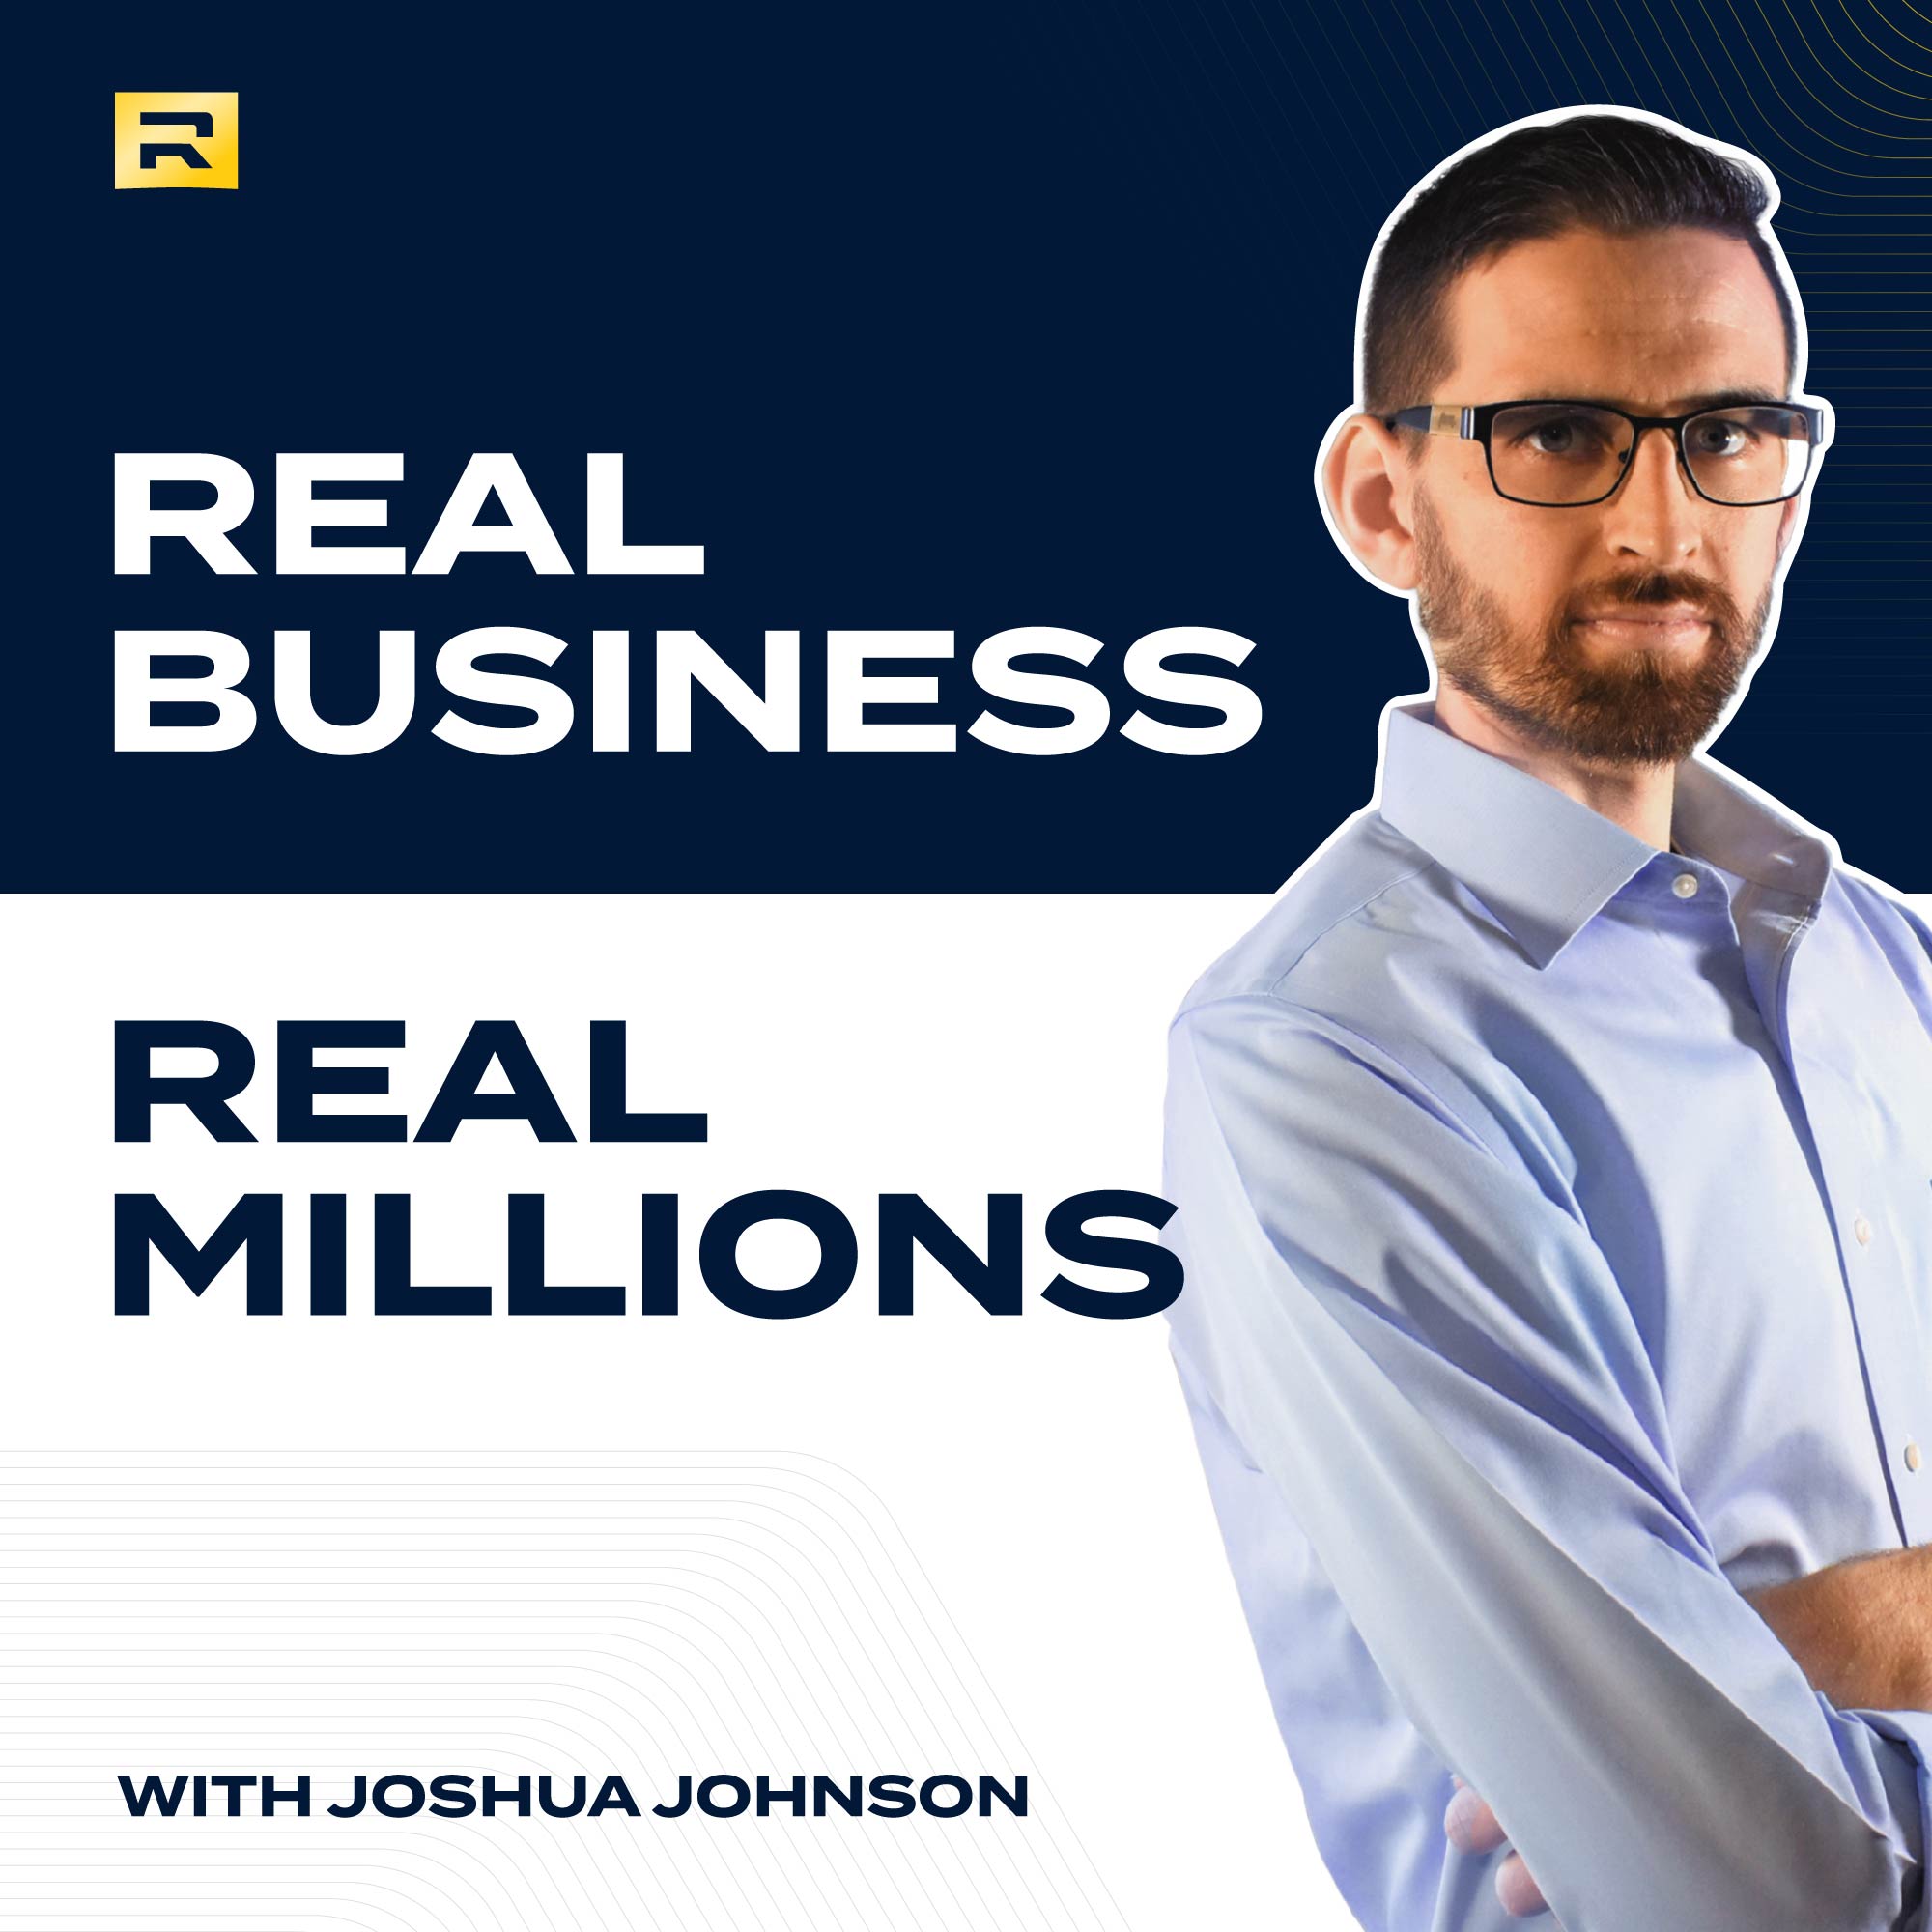 Real Business Real Millions